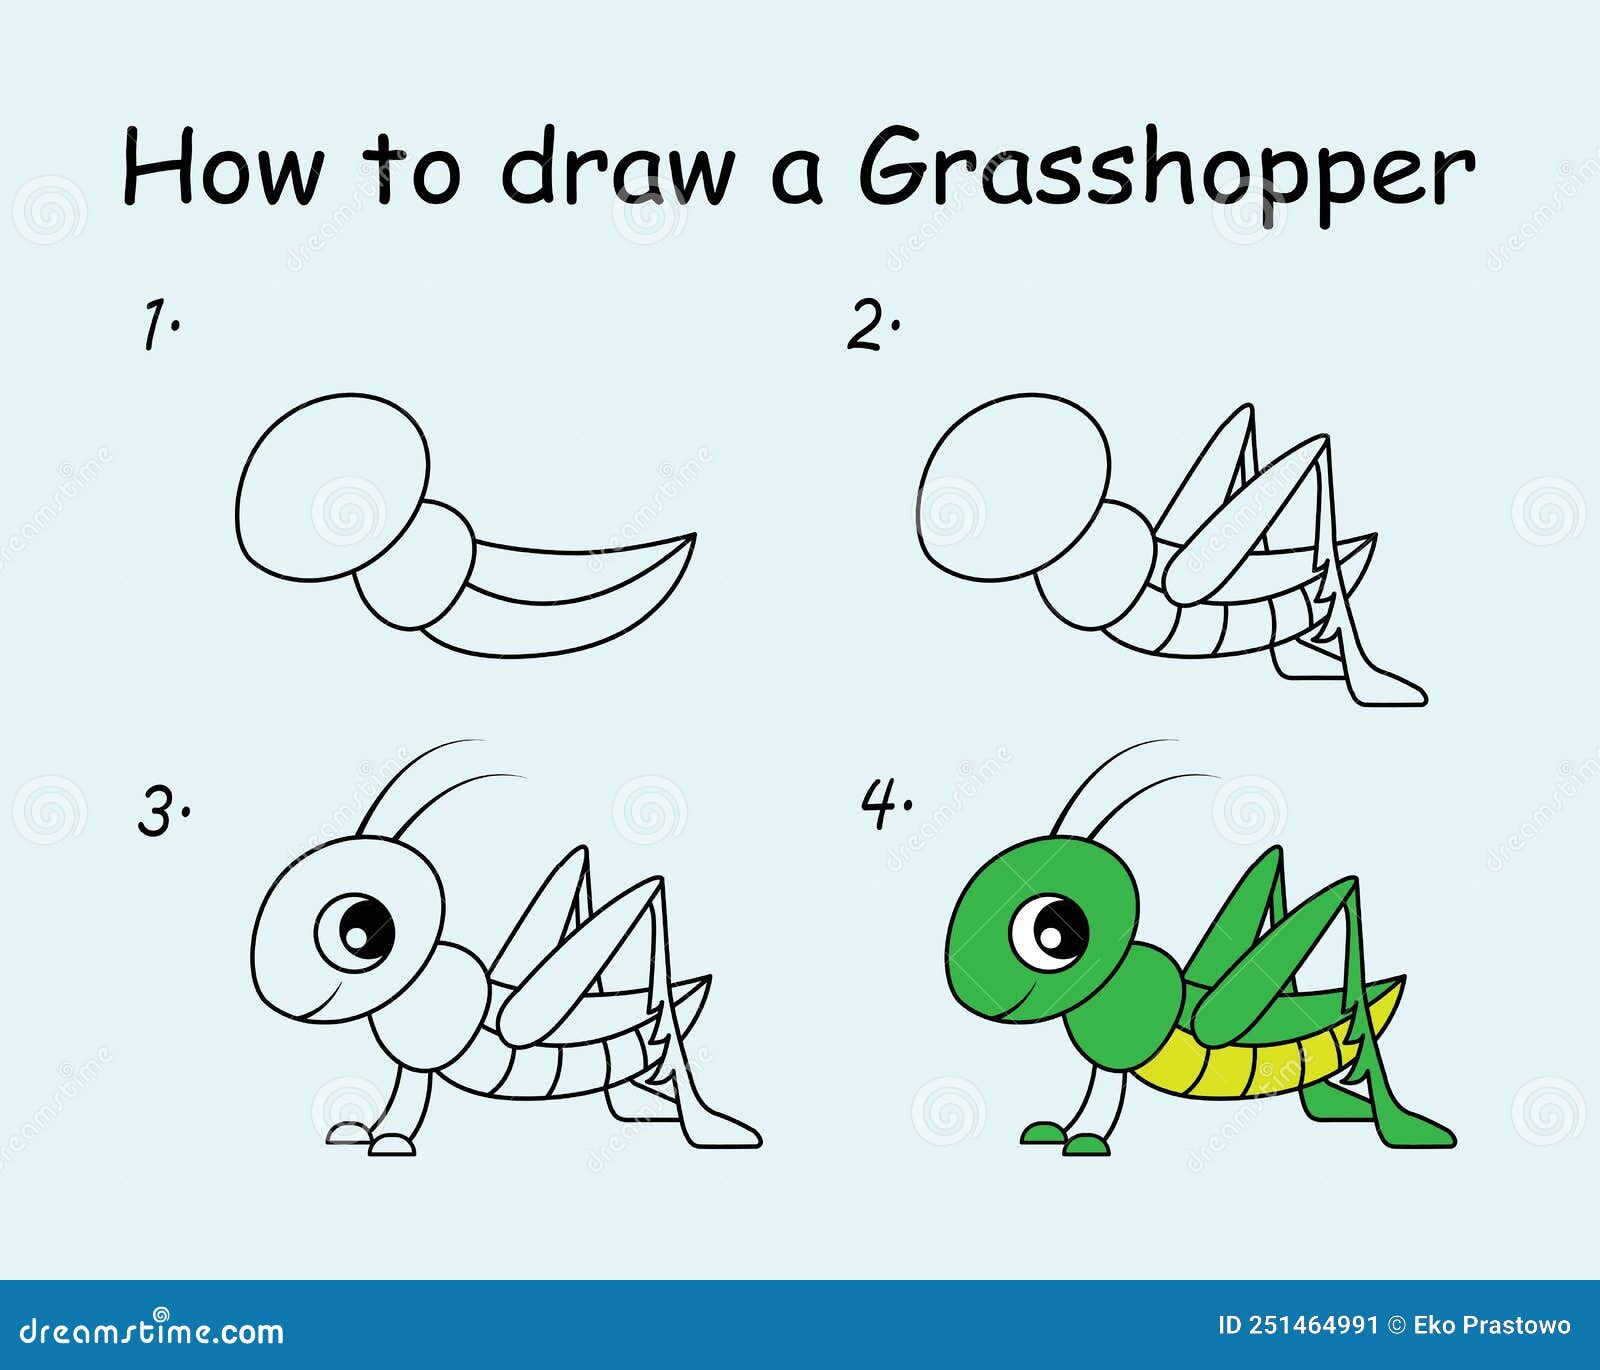 Grasshopper Drawing Easy Step by Step - Oil Pastel Drawing - YouTube